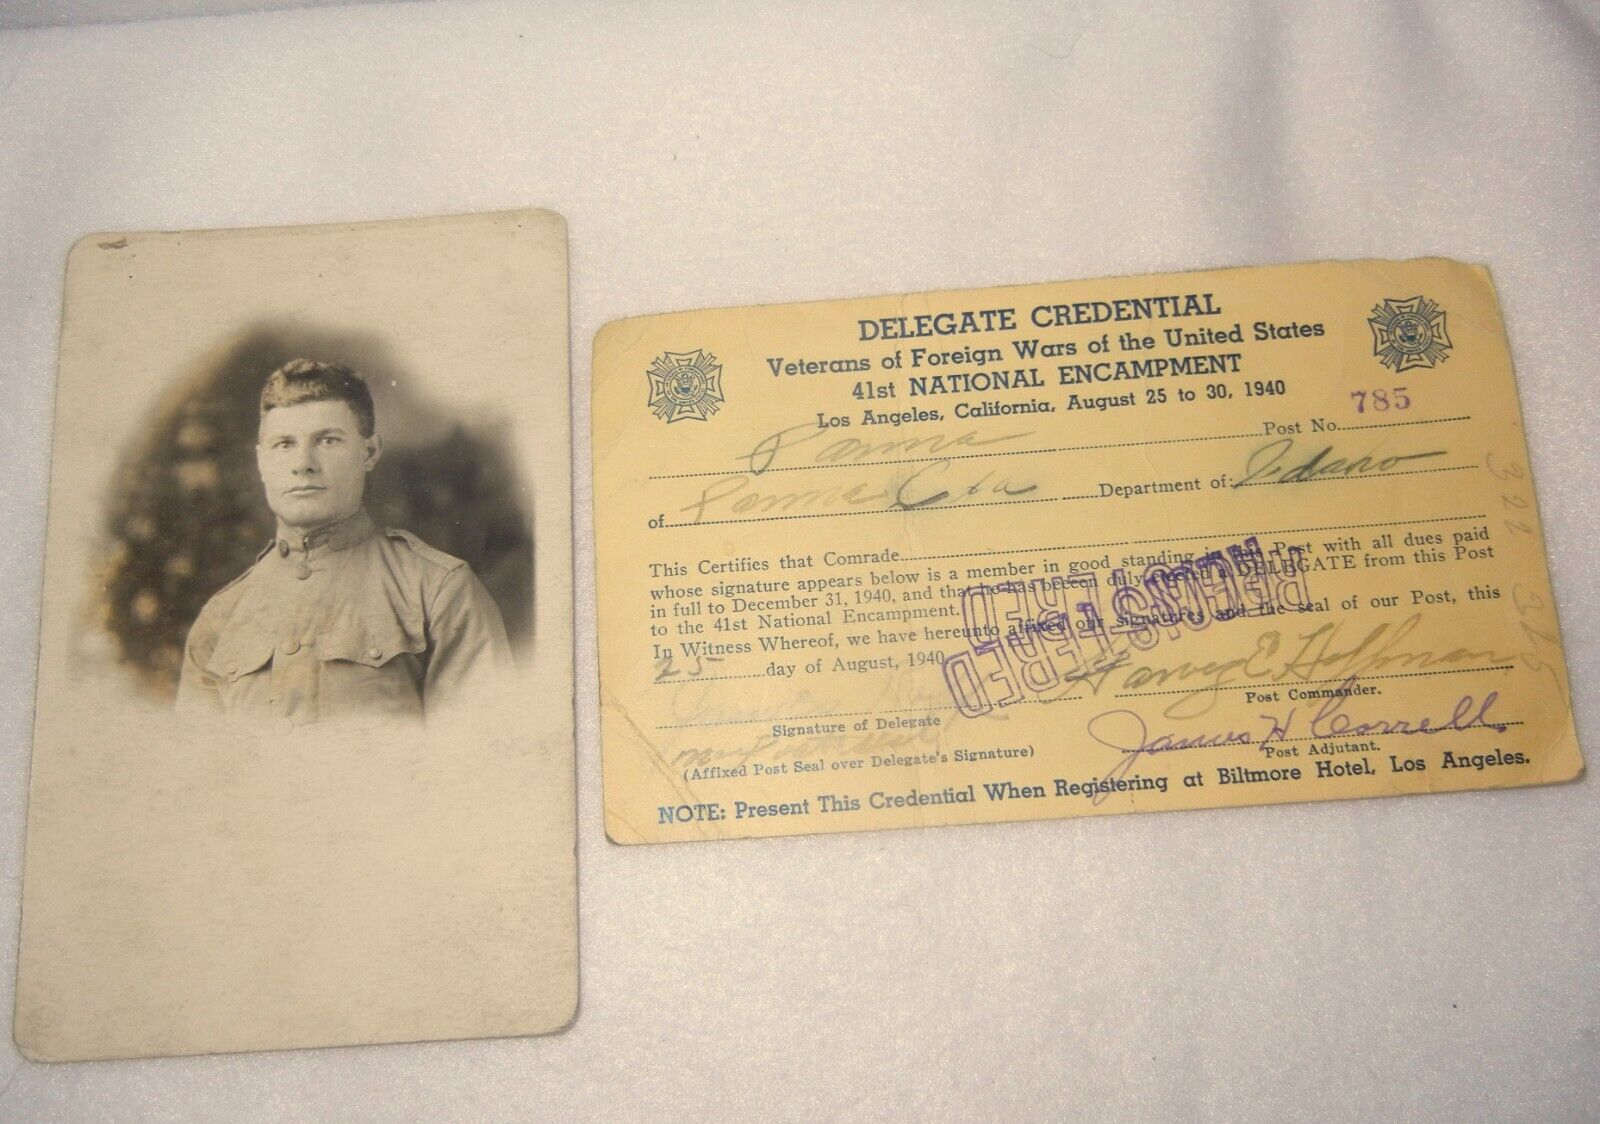 WWI U. S. Army Photo of James F Roff of Parma Id. + 1940 VFW Delegate Credential